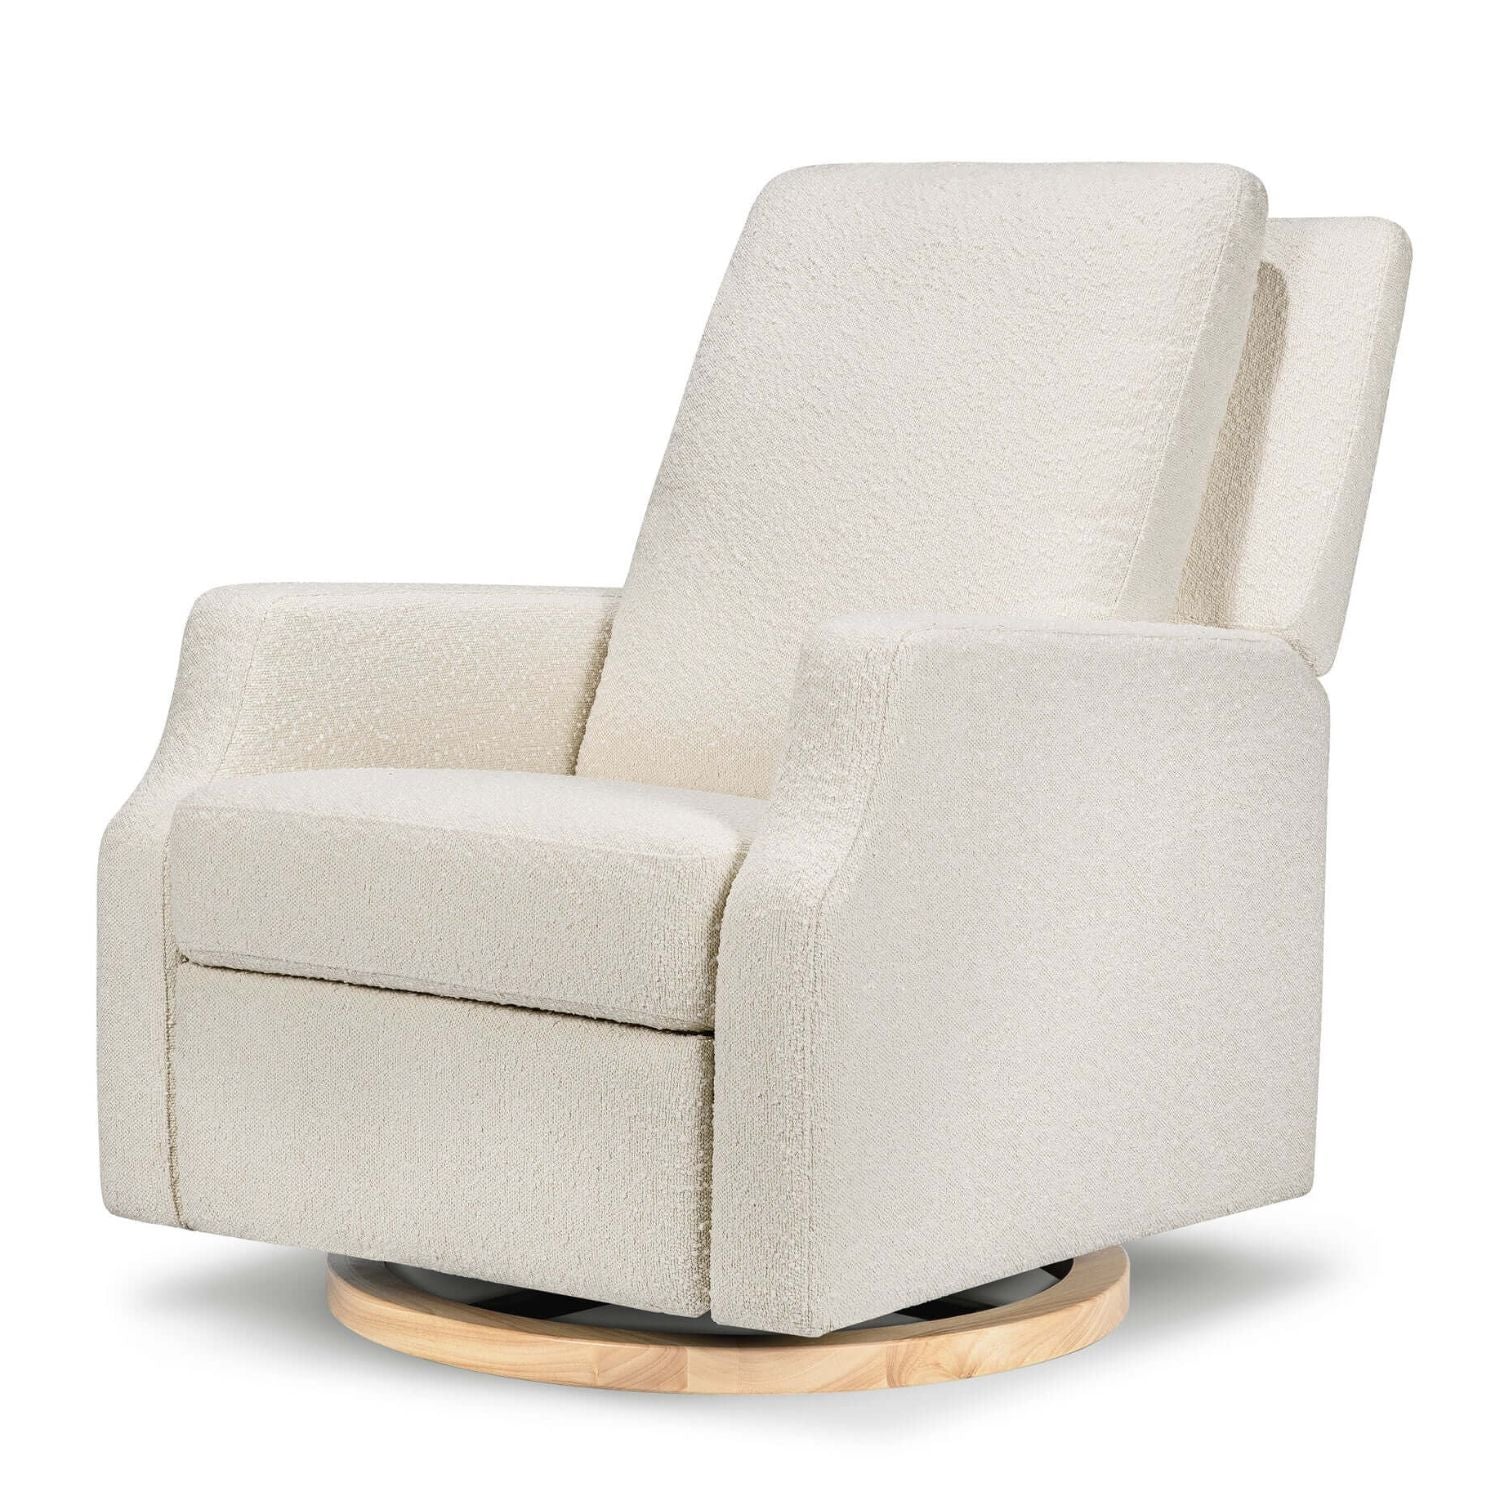 Namesake Crewe Recliner and Swivel Glider | The Baby Cubby